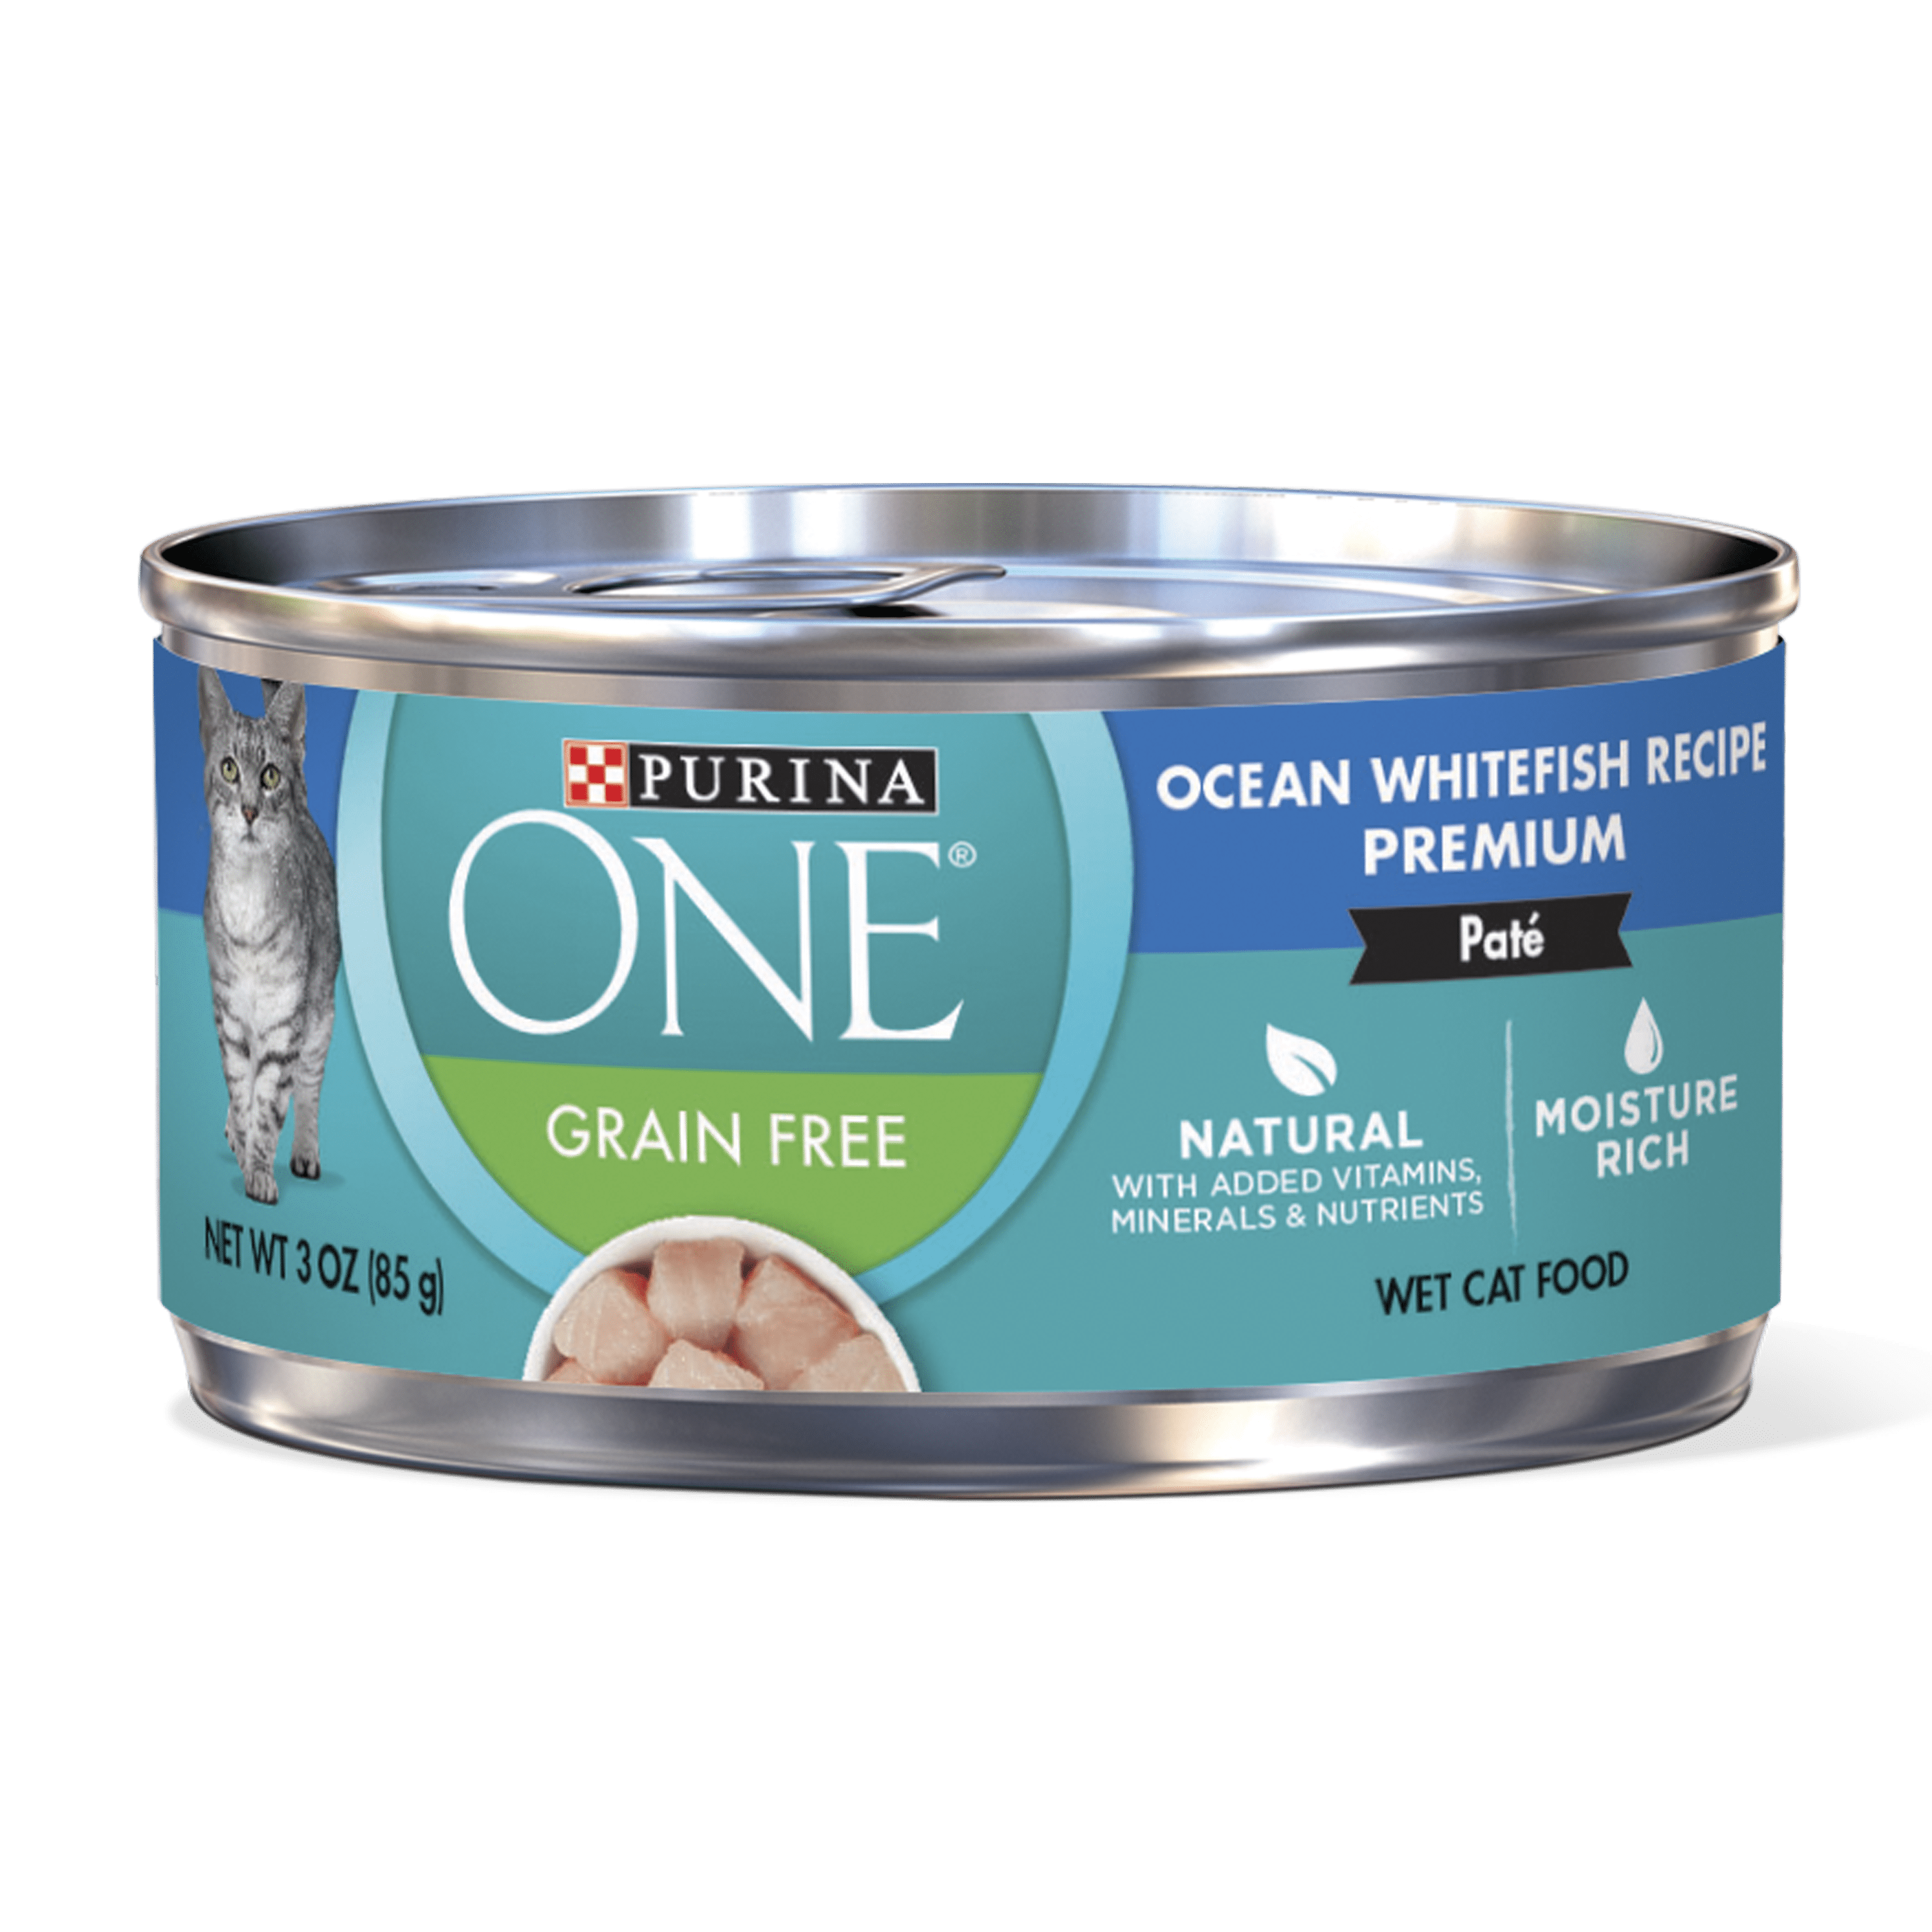 purina-one-natural-high-protein-grain-free-pate-wet-cat-food-ocean